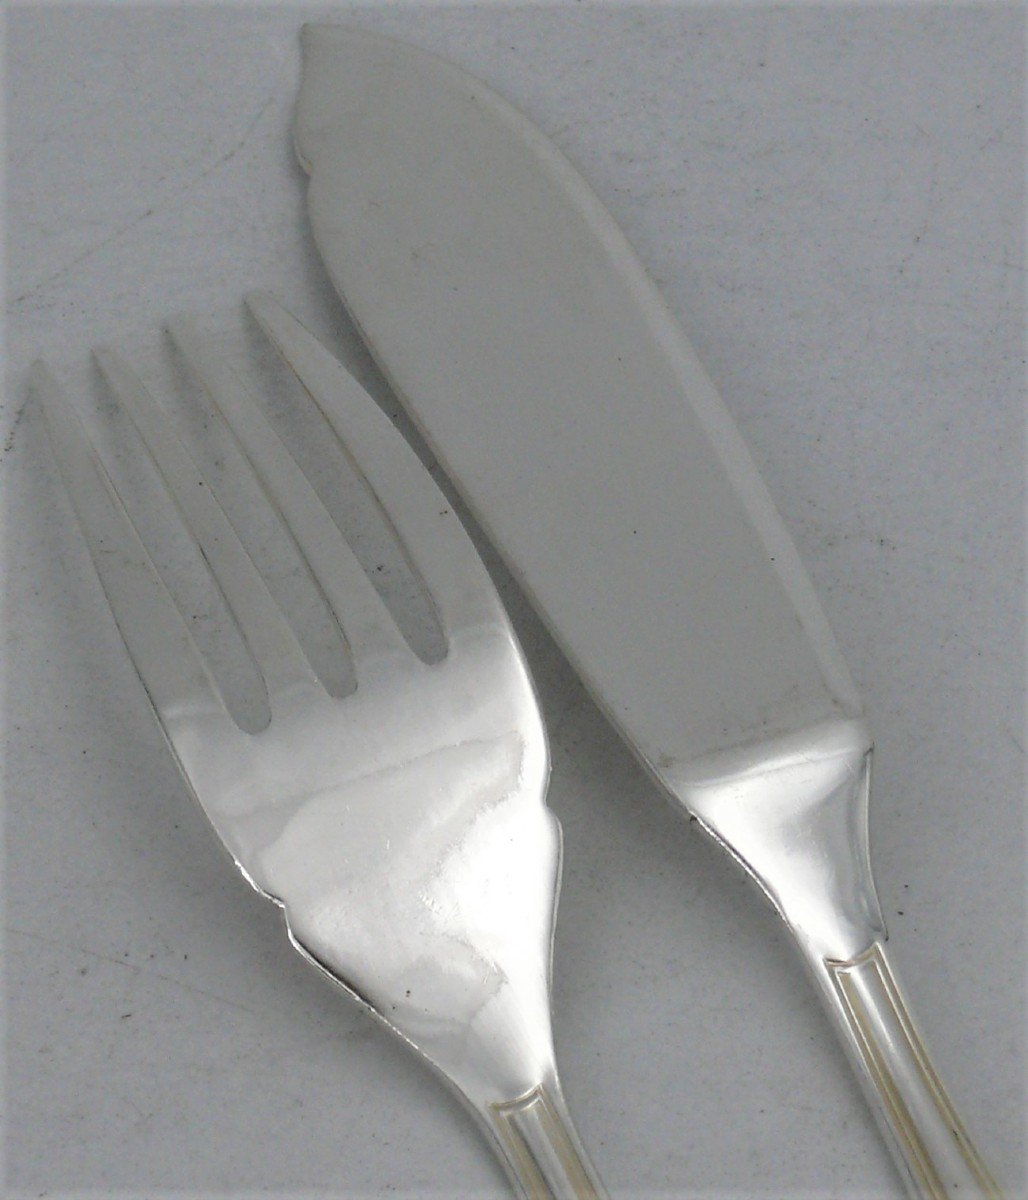 Christofle Marot Model, 12 Fish Cutlery, 24 Pieces, Excellent Condition, Silver Metal.-photo-1